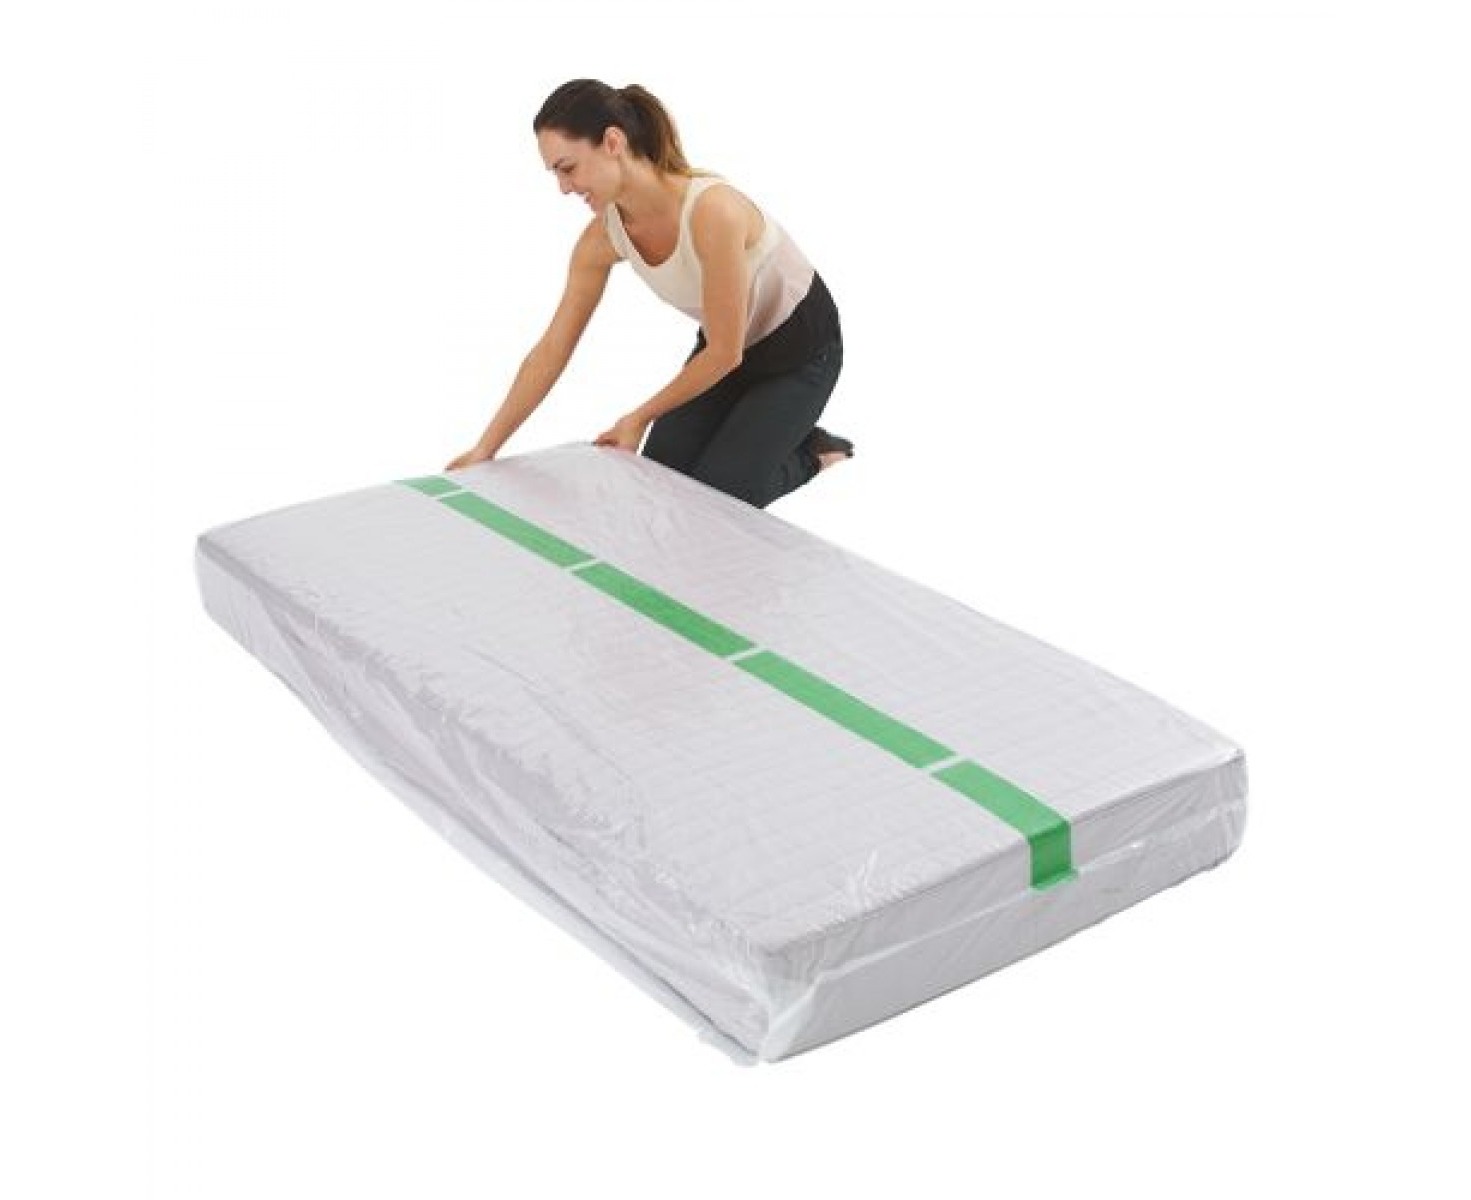 plastic mattress protector for storage